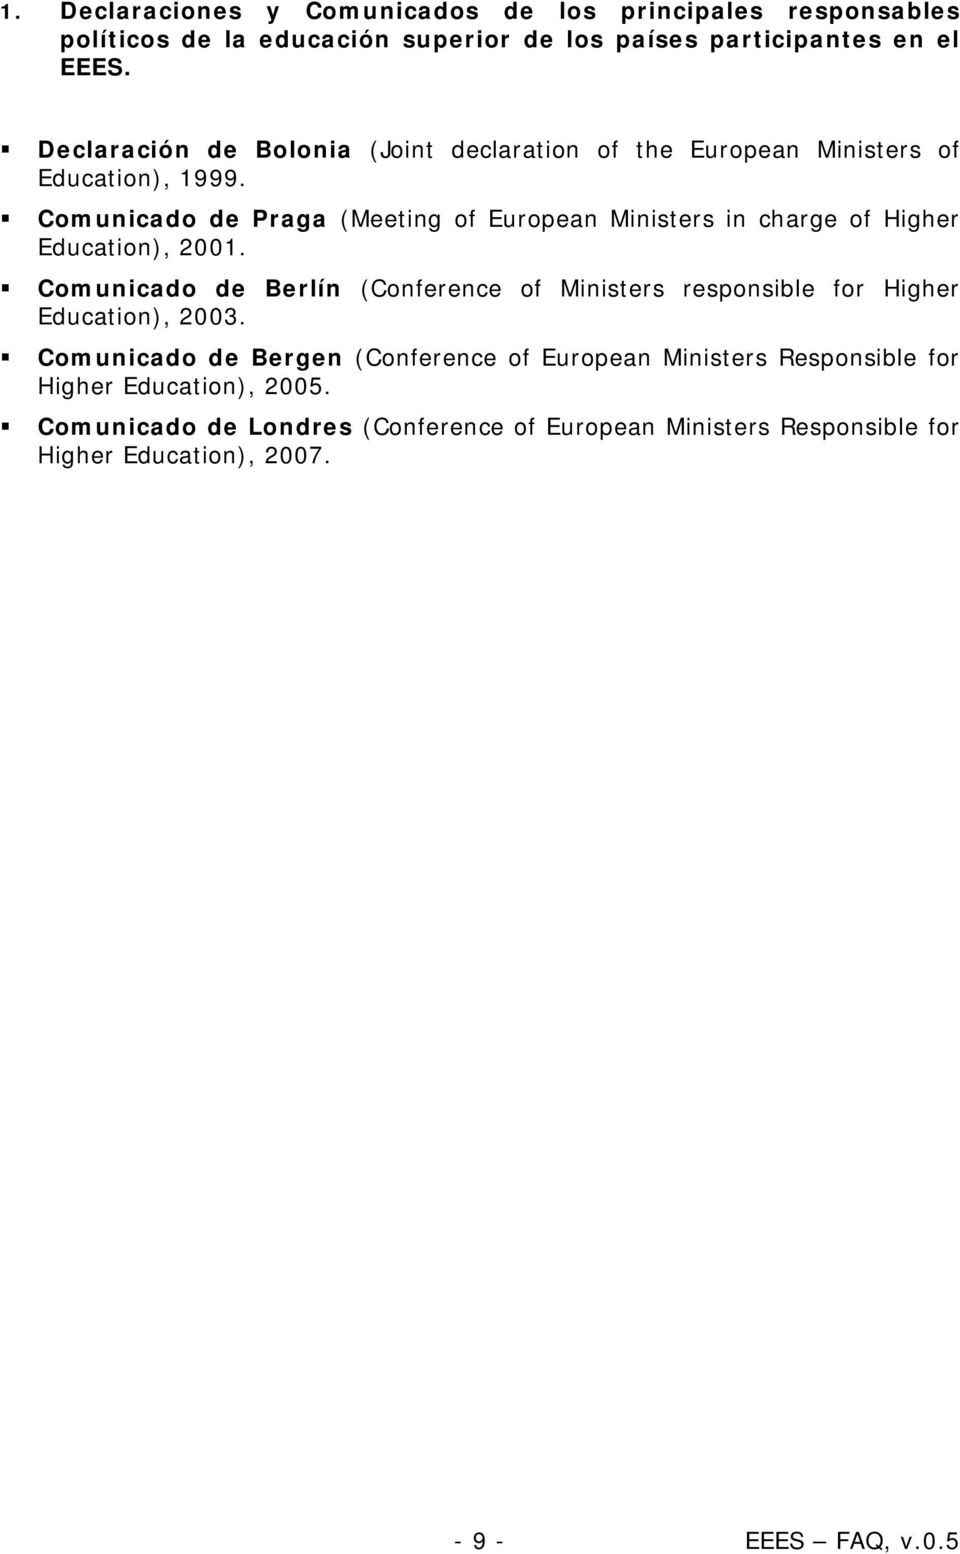 Comunicado de Praga (Meeting of European Ministers in charge of Higher Education), 2001.